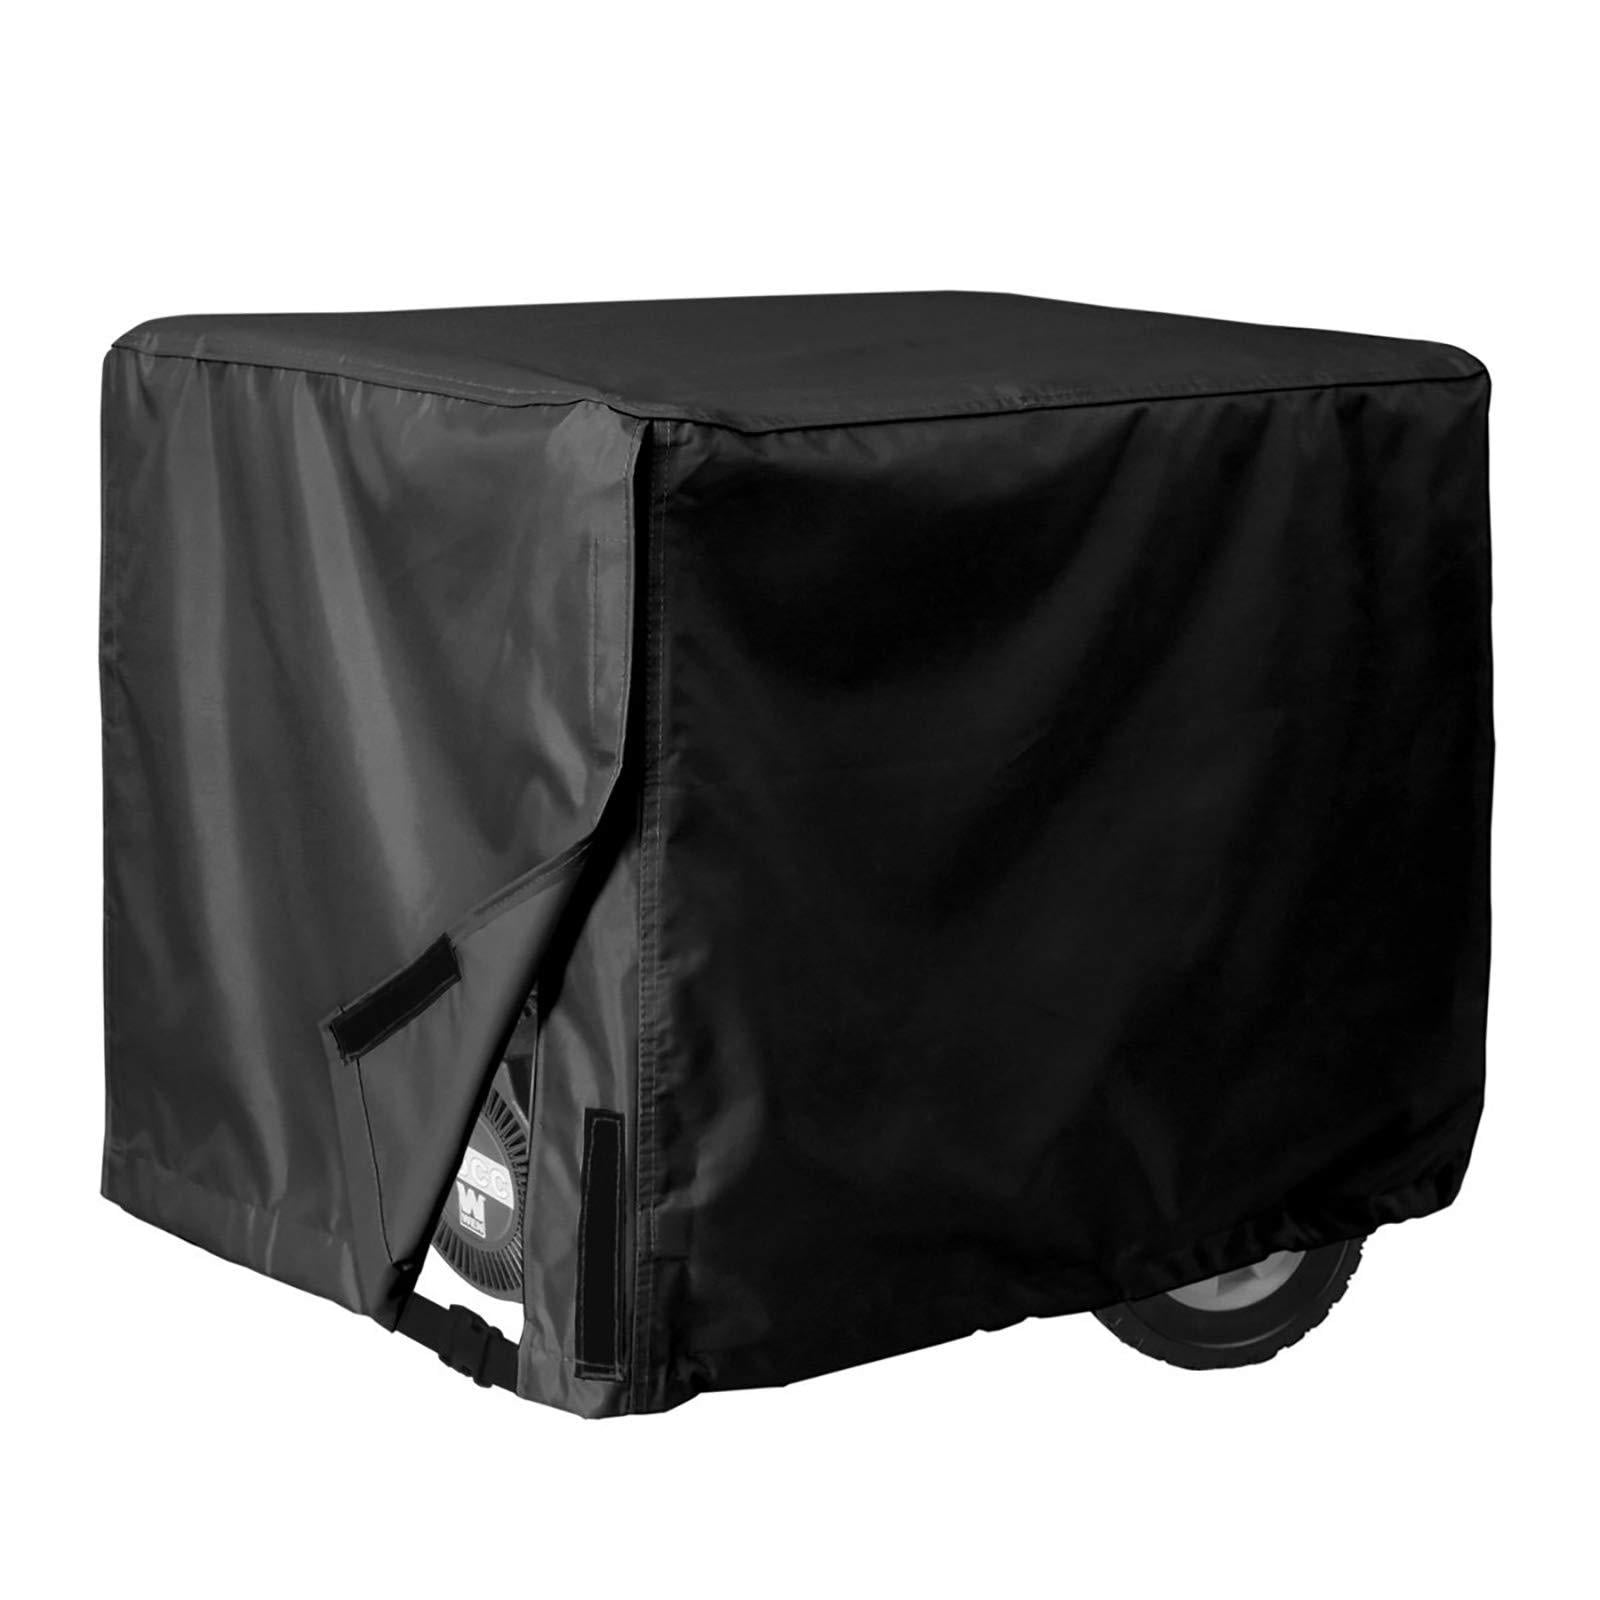 Weather/UV Resistant Generator Cover 32 x 24 x 24 inch Universal Portable NEW 